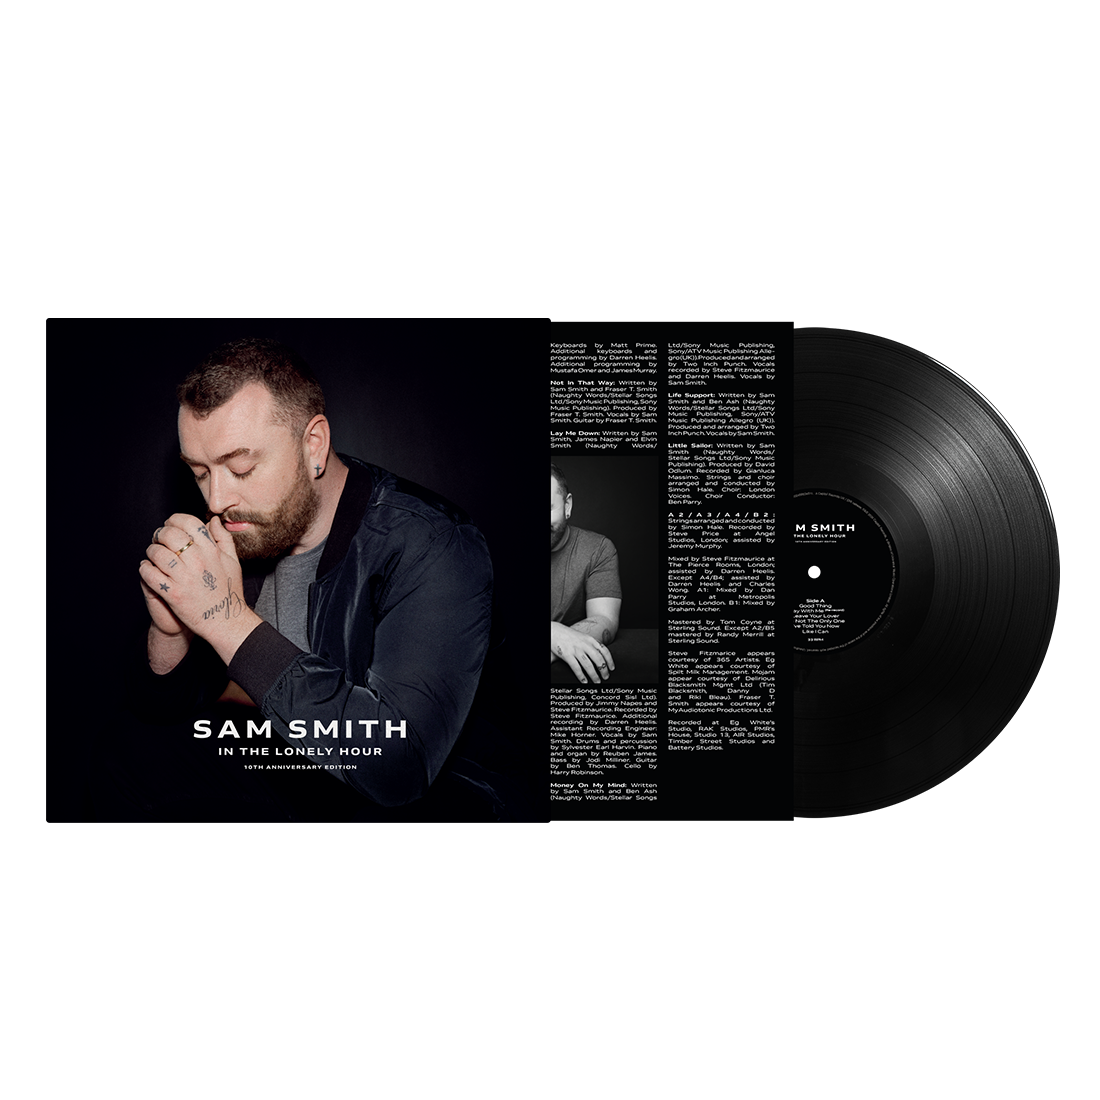 Sam Smith - In The Lonely Hour (10th Anniversary Edition) 1LP